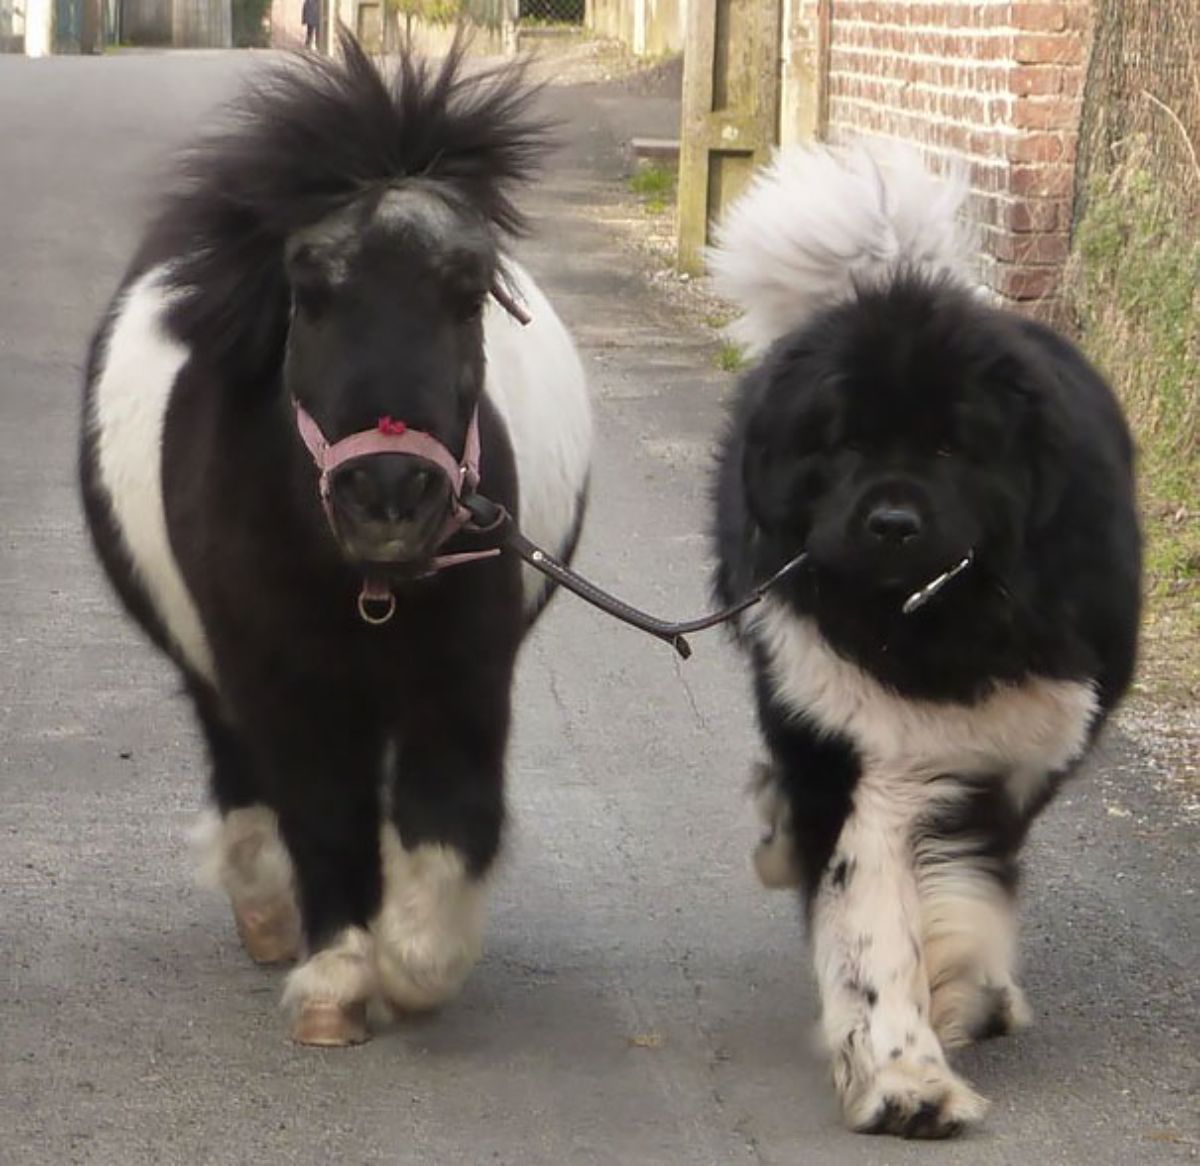 black and white pony and dog walking together